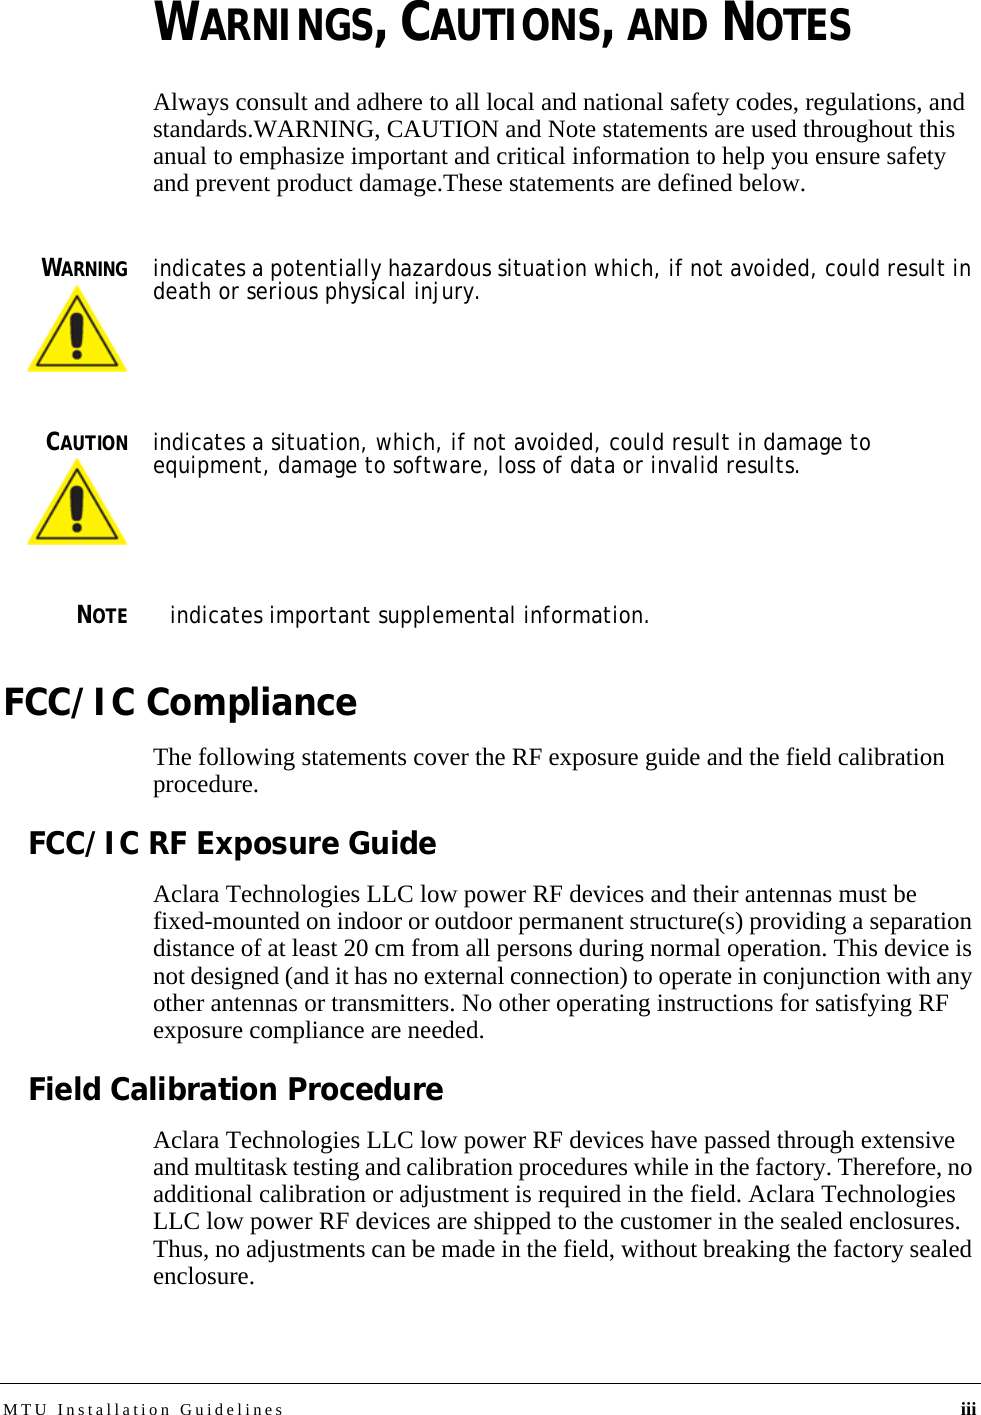 MTU Installation Guidelines iiiWARNINGS, CAUTIONS, AND NOTESAlways consult and adhere to all local and national safety codes, regulations, and standards.WARNING, CAUTION and Note statements are used throughout this anual to emphasize important and critical information to help you ensure safety and prevent product damage.These statements are defined below.WARNINGindicates a potentially hazardous situation which, if not avoided, could result in death or serious physical injury.CAUTIONindicates a situation, which, if not avoided, could result in damage to equipment, damage to software, loss of data or invalid results.NOTEindicates important supplemental information.FCC/IC ComplianceThe following statements cover the RF exposure guide and the field calibration procedure.FCC/IC RF Exposure GuideAclara Technologies LLC low power RF devices and their antennas must be fixed-mounted on indoor or outdoor permanent structure(s) providing a separation distance of at least 20 cm from all persons during normal operation. This device is not designed (and it has no external connection) to operate in conjunction with any other antennas or transmitters. No other operating instructions for satisfying RF exposure compliance are needed.Field Calibration ProcedureAclara Technologies LLC low power RF devices have passed through extensive and multitask testing and calibration procedures while in the factory. Therefore, no additional calibration or adjustment is required in the field. Aclara Technologies LLC low power RF devices are shipped to the customer in the sealed enclosures. Thus, no adjustments can be made in the field, without breaking the factory sealed enclosure.